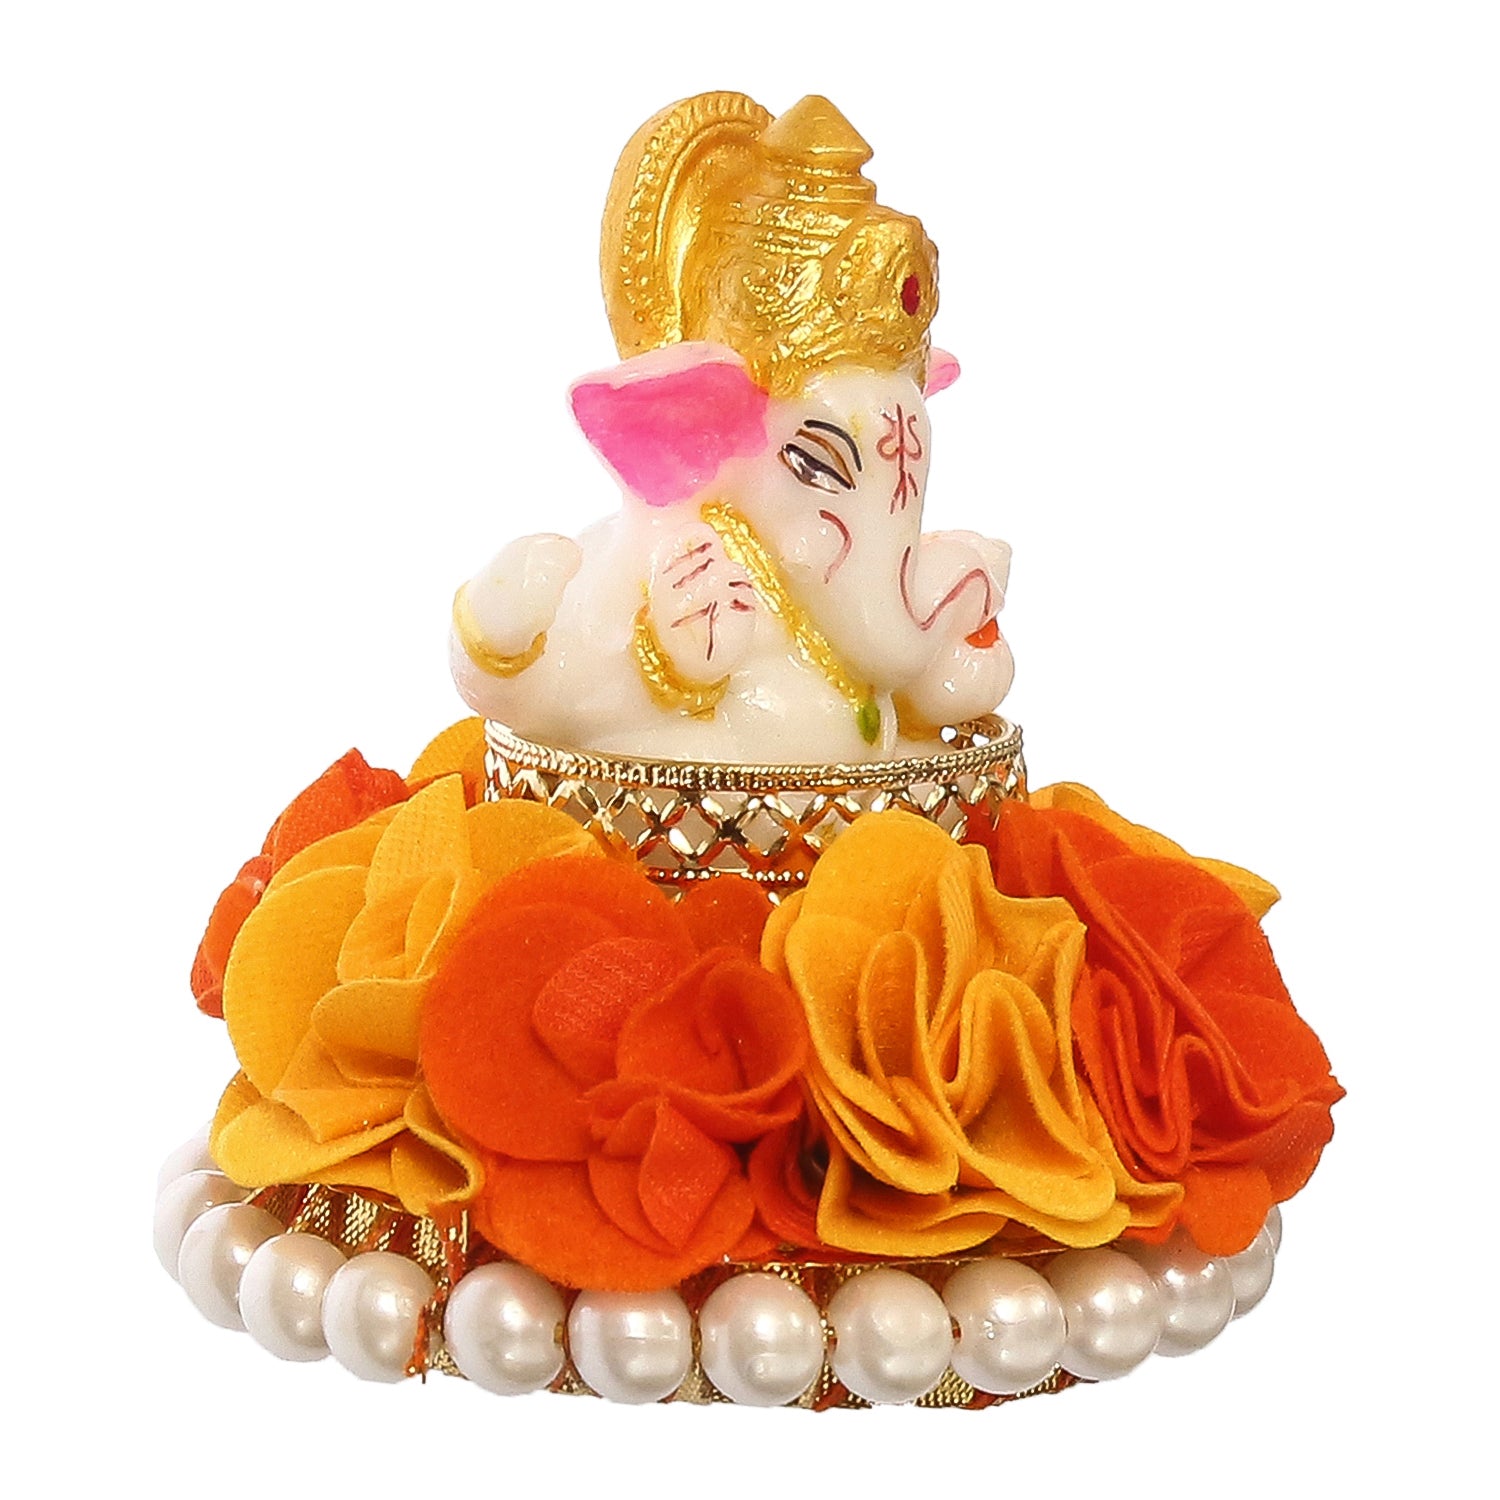 Lord Ganesha Idol On Decorative Handcrafted Orange And Yellow Flowers Plate 4